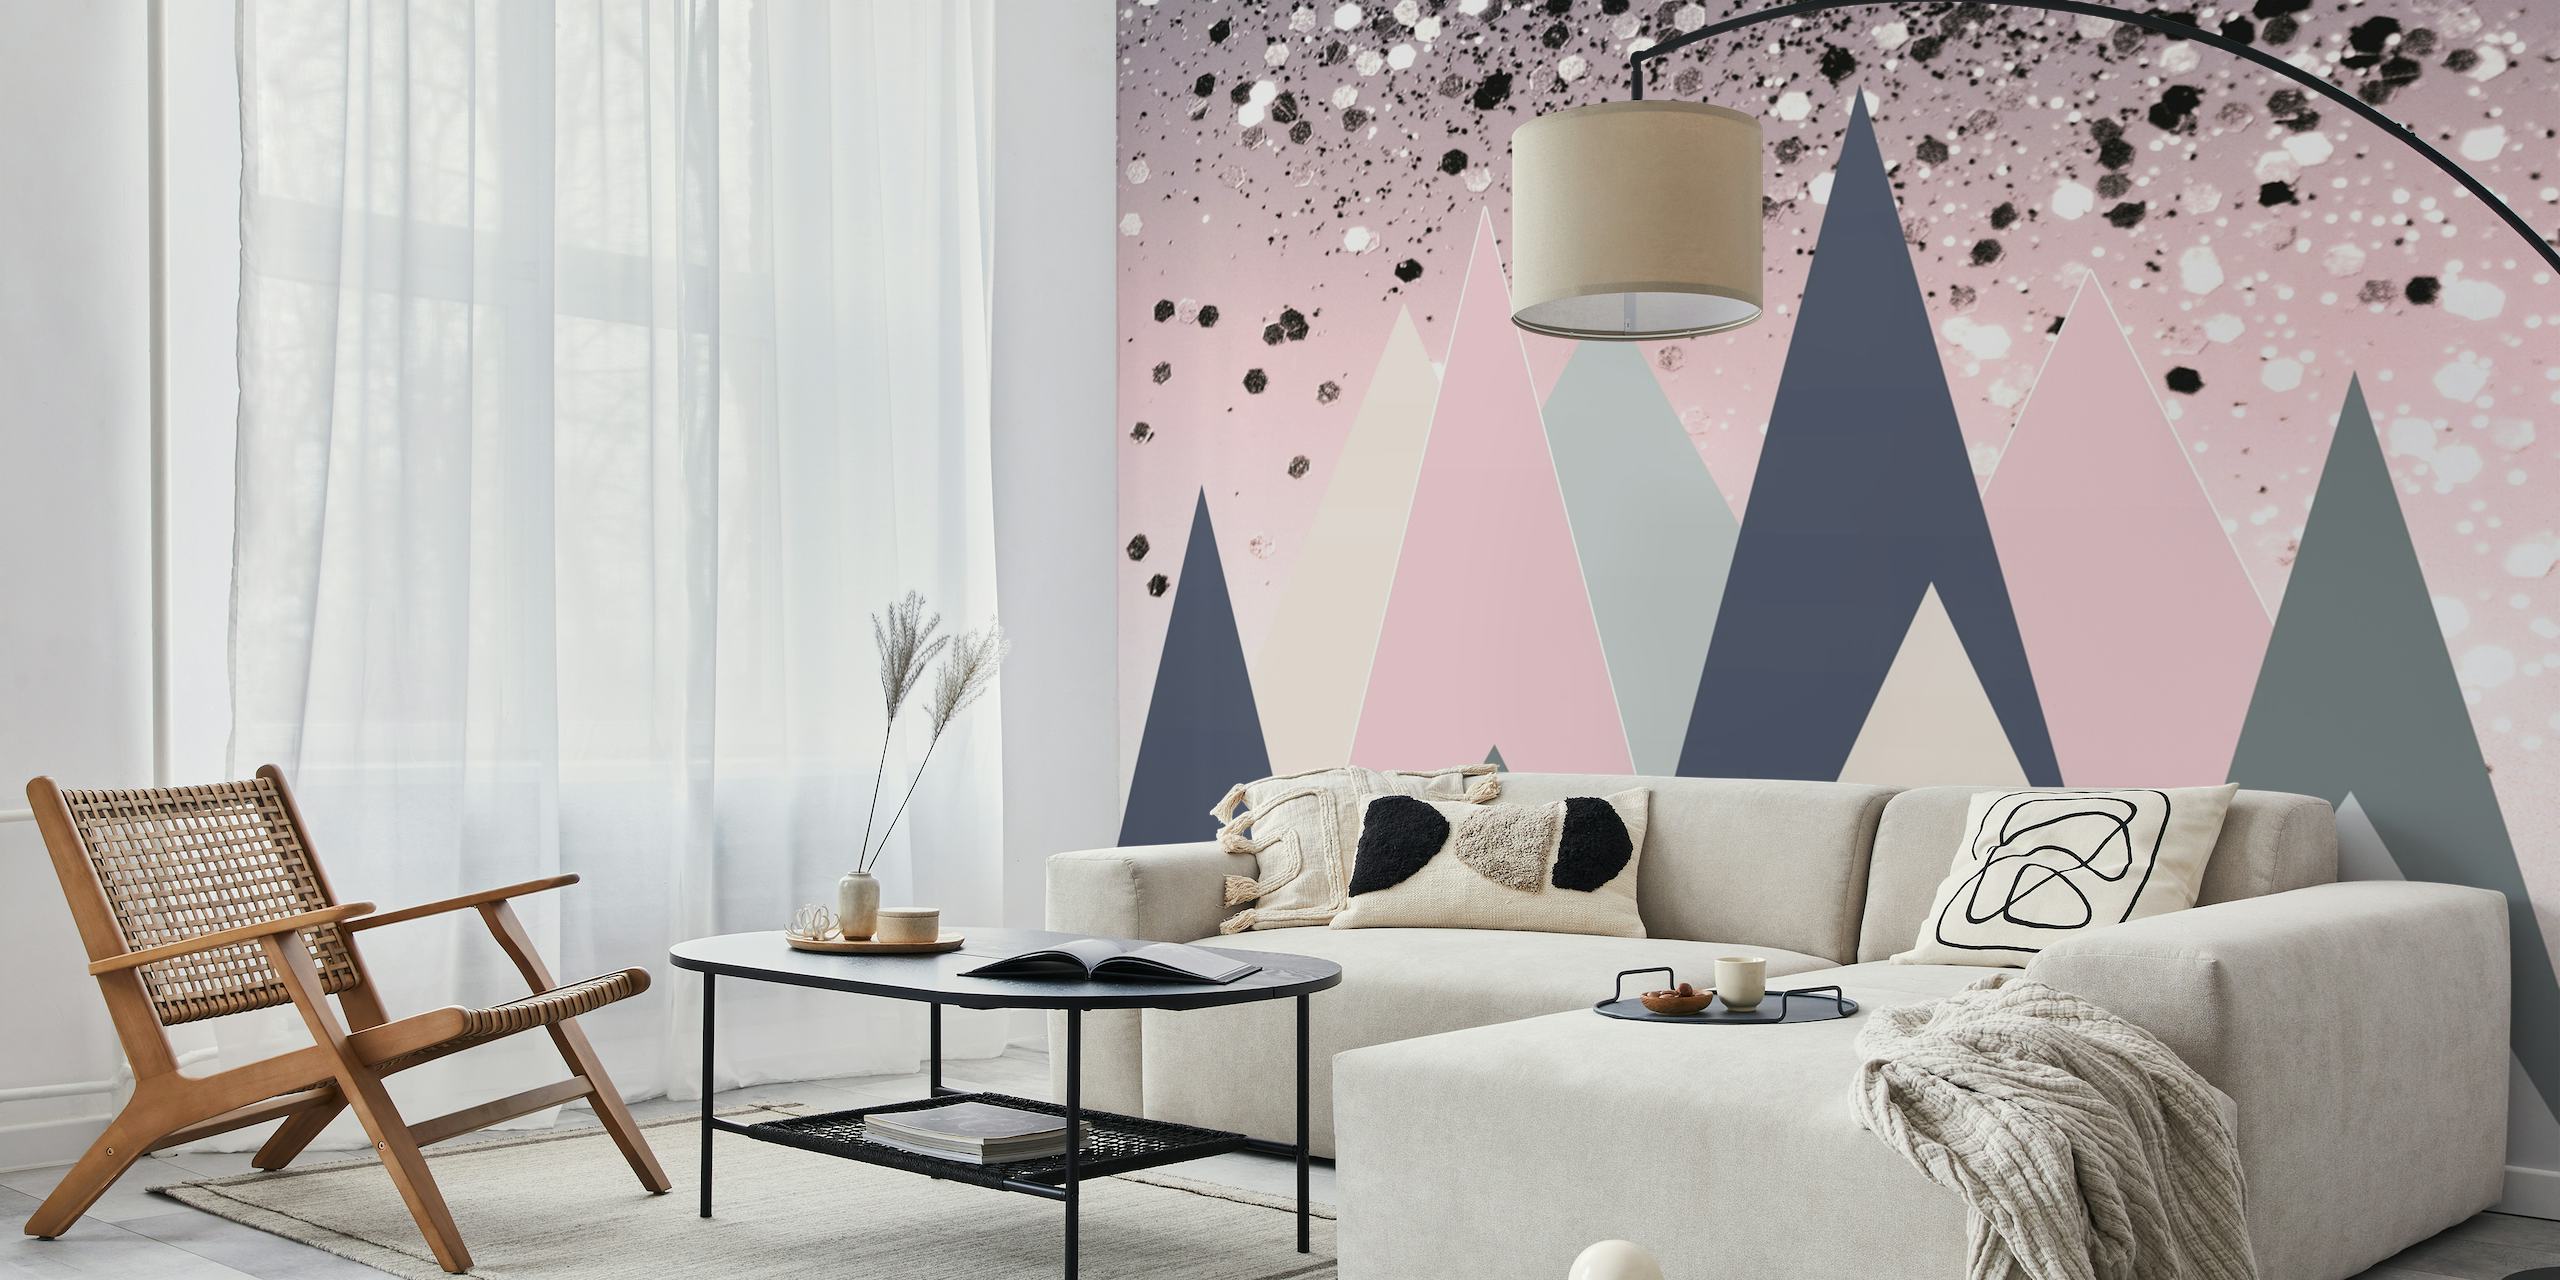 Geometric Mountains with hues of pink, gray, and cream topped with a glittery texture